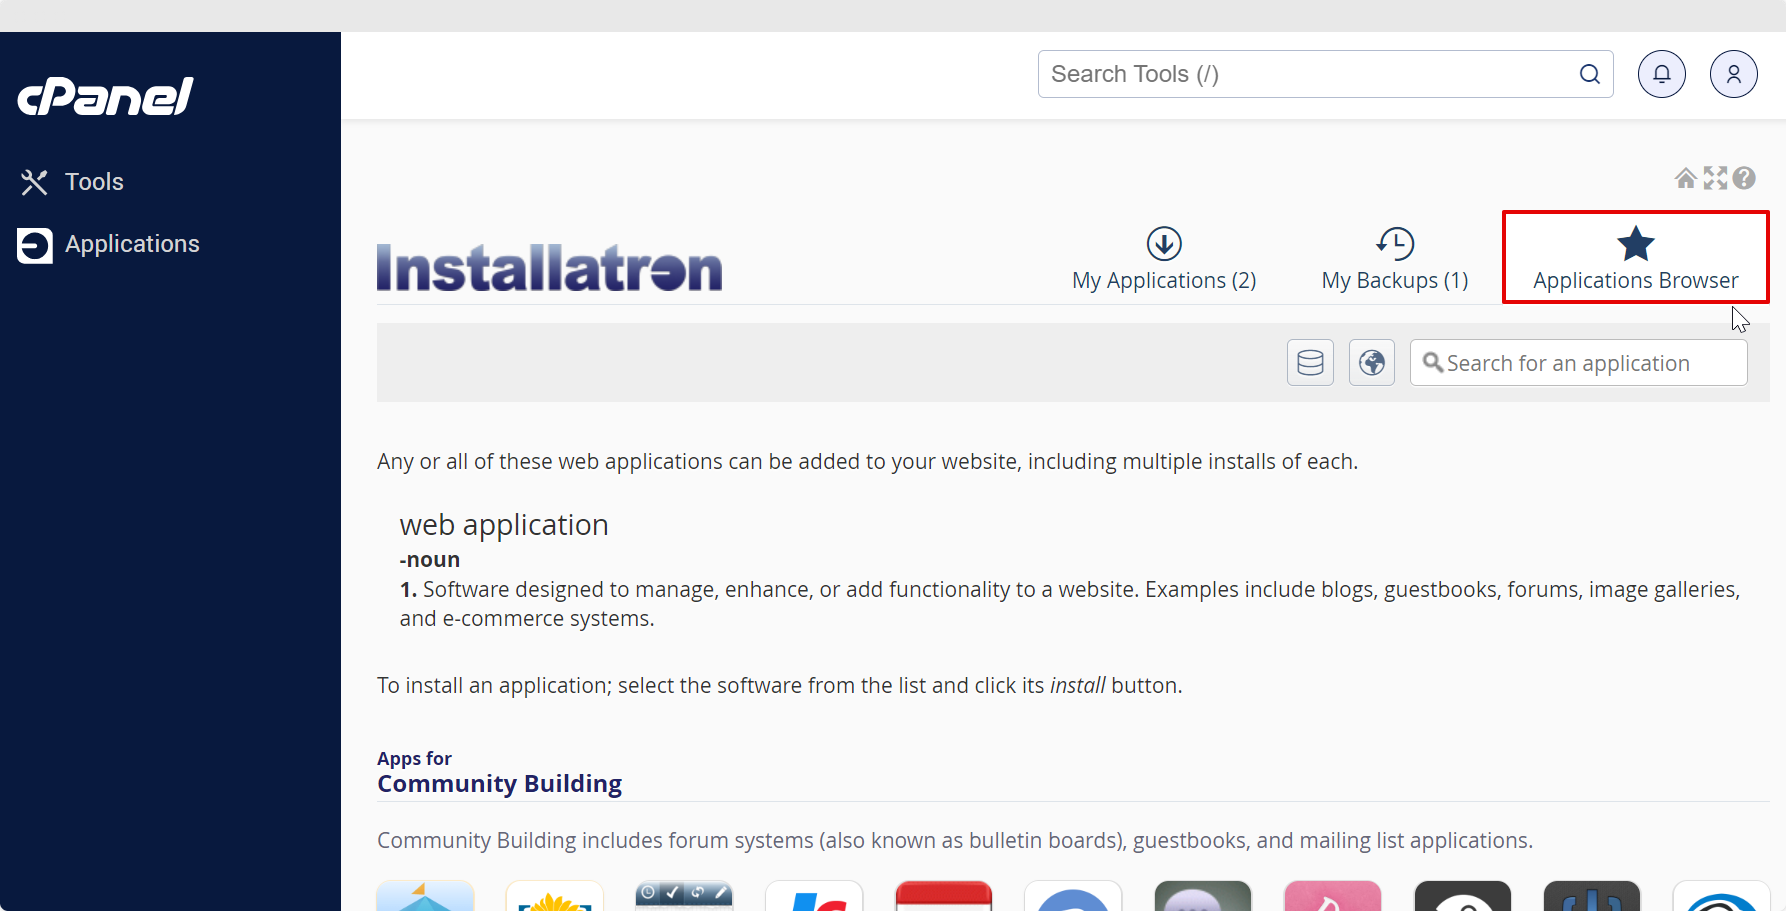 Applications Browser Tab of Installatron